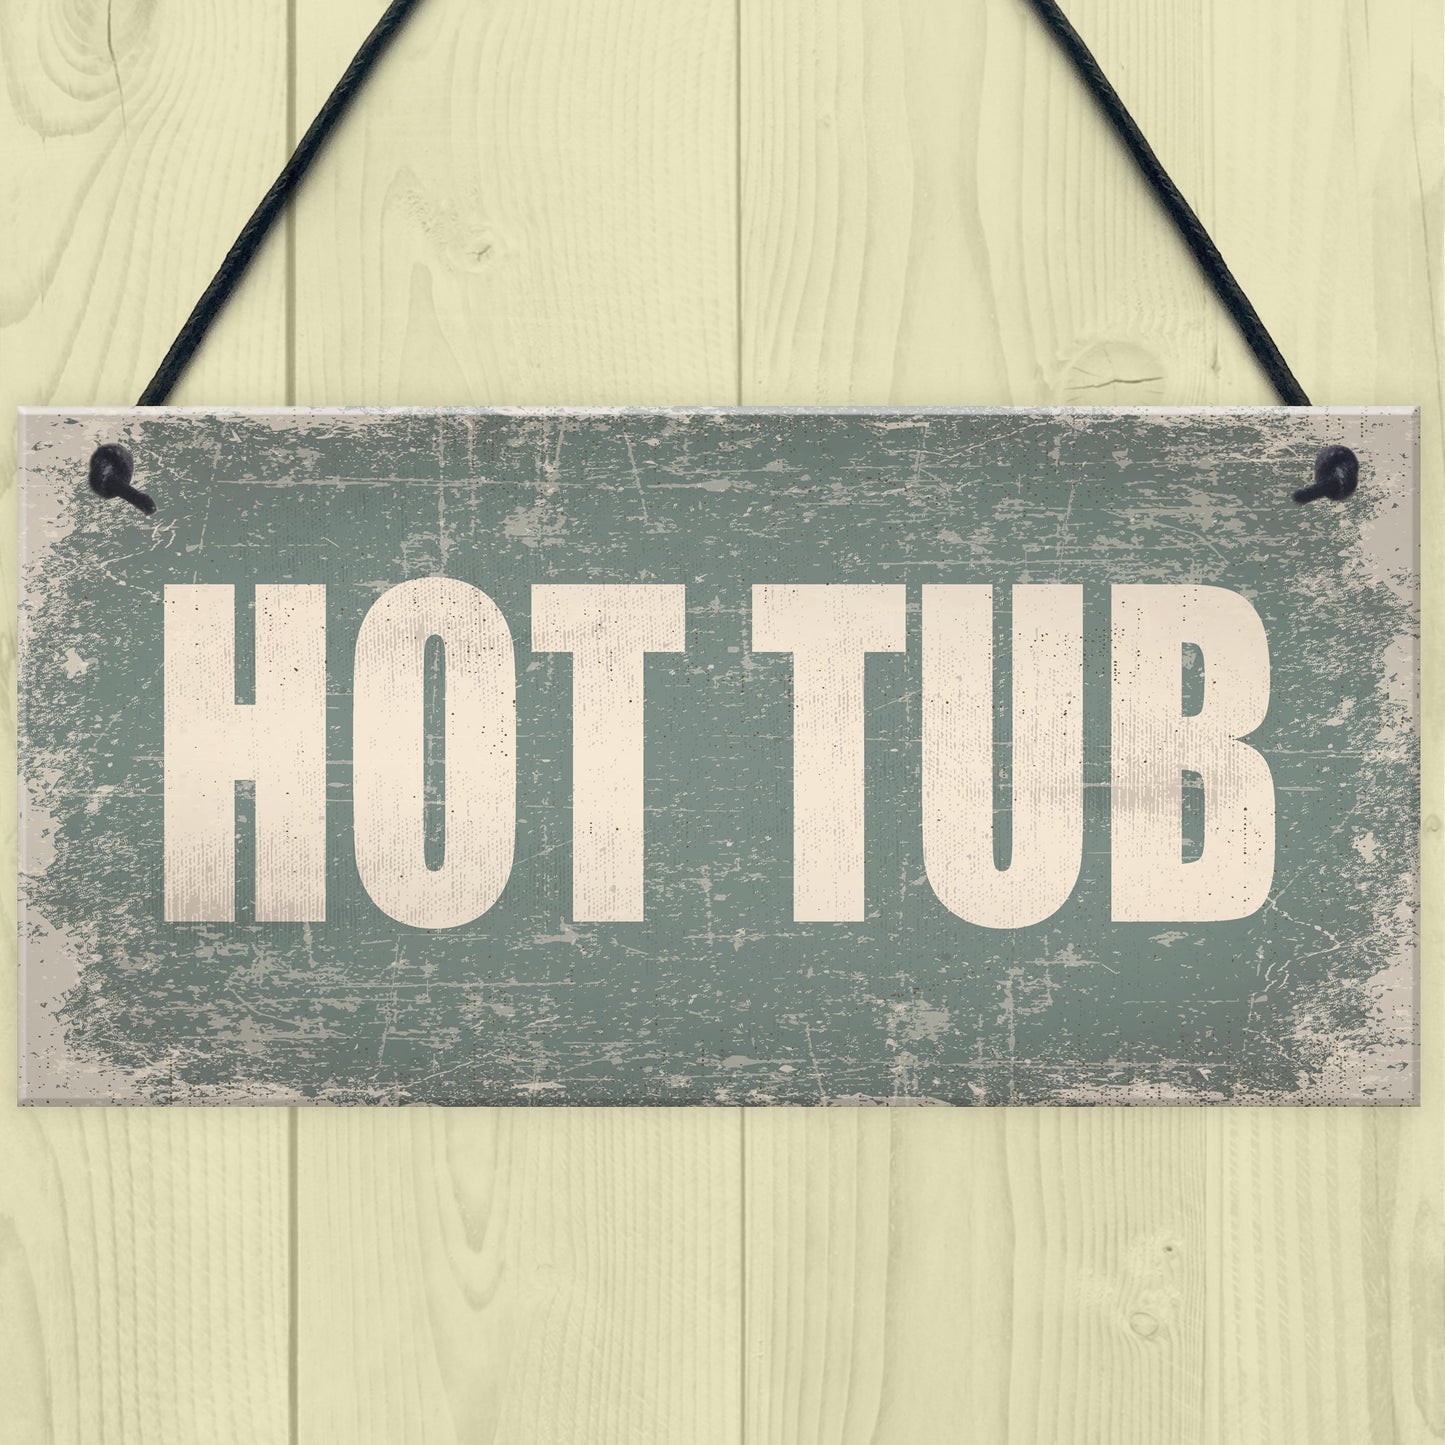 Hot Tub Novelty Hanging Plaque Garden Shed Sign Jucuzzi Pool